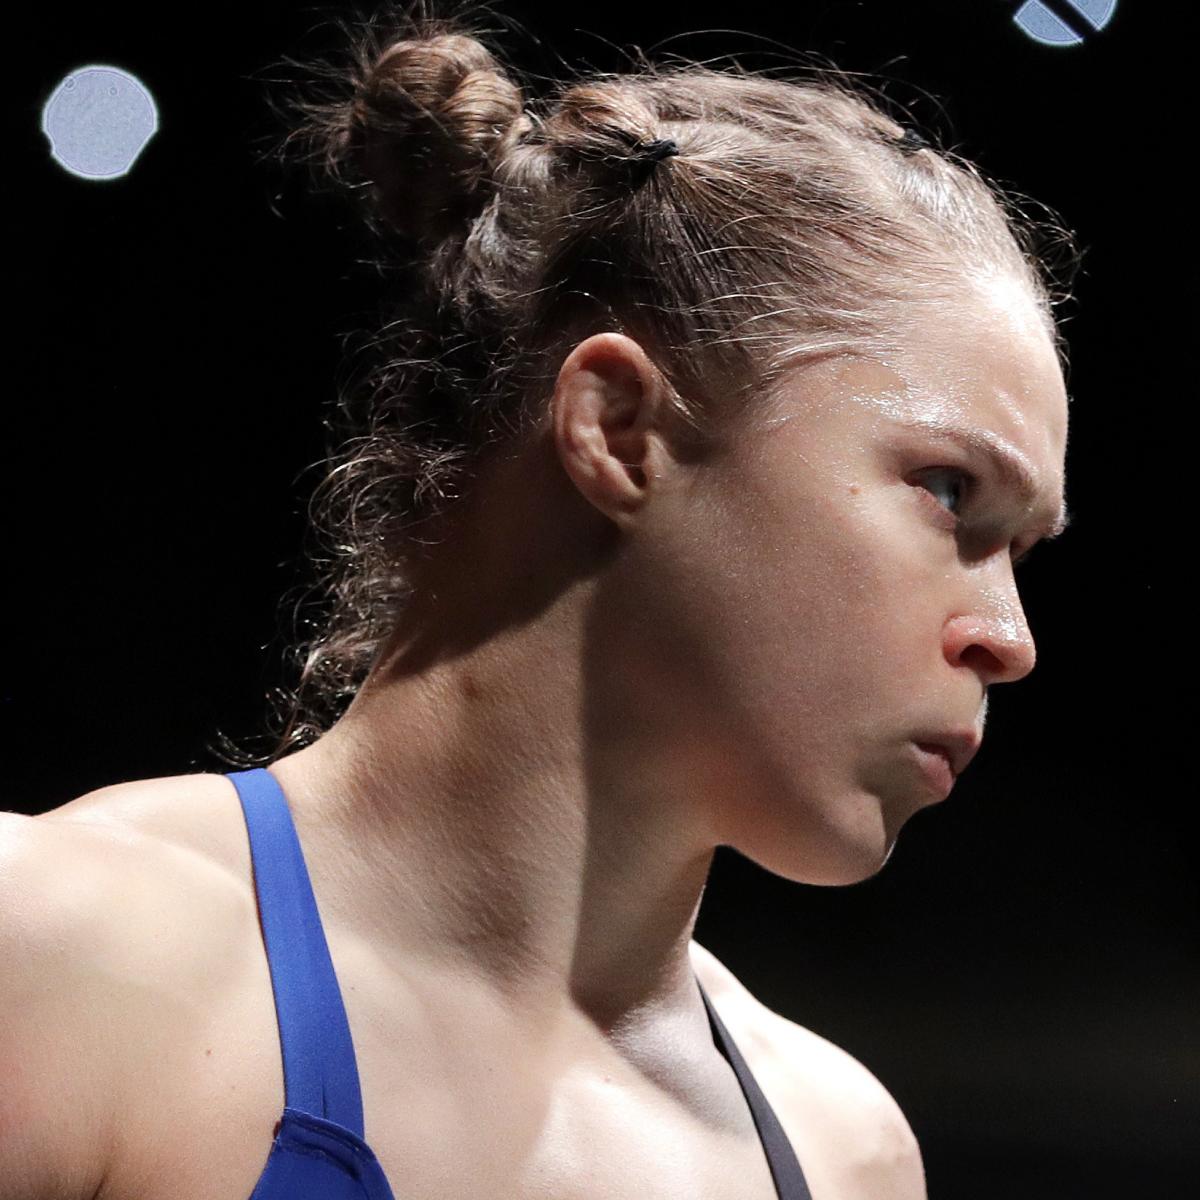 Cris Cyborg, Ronda Rousey and the 10 Best Fighters in Women's MMA